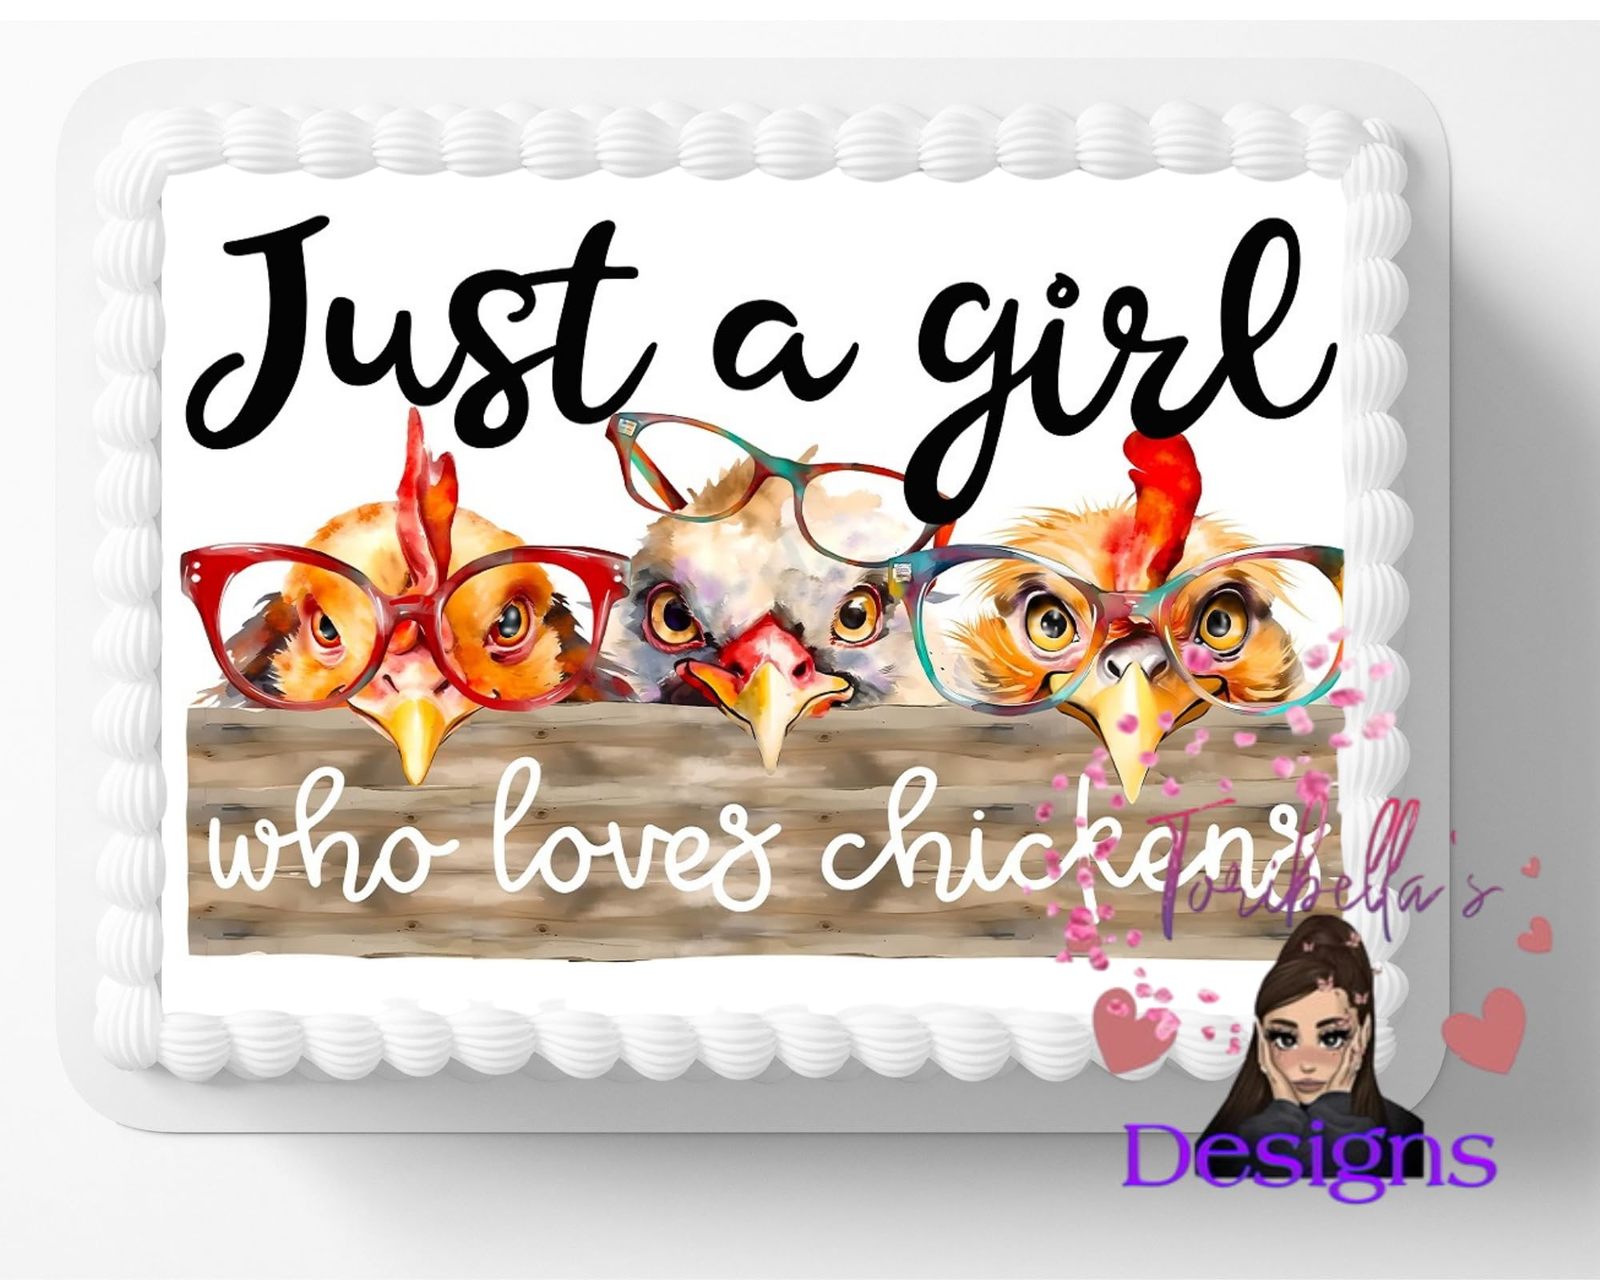 Just A Girl Who Loves Chickens Edible Image Edible Birthday Cake Topper Frosting - $16.47